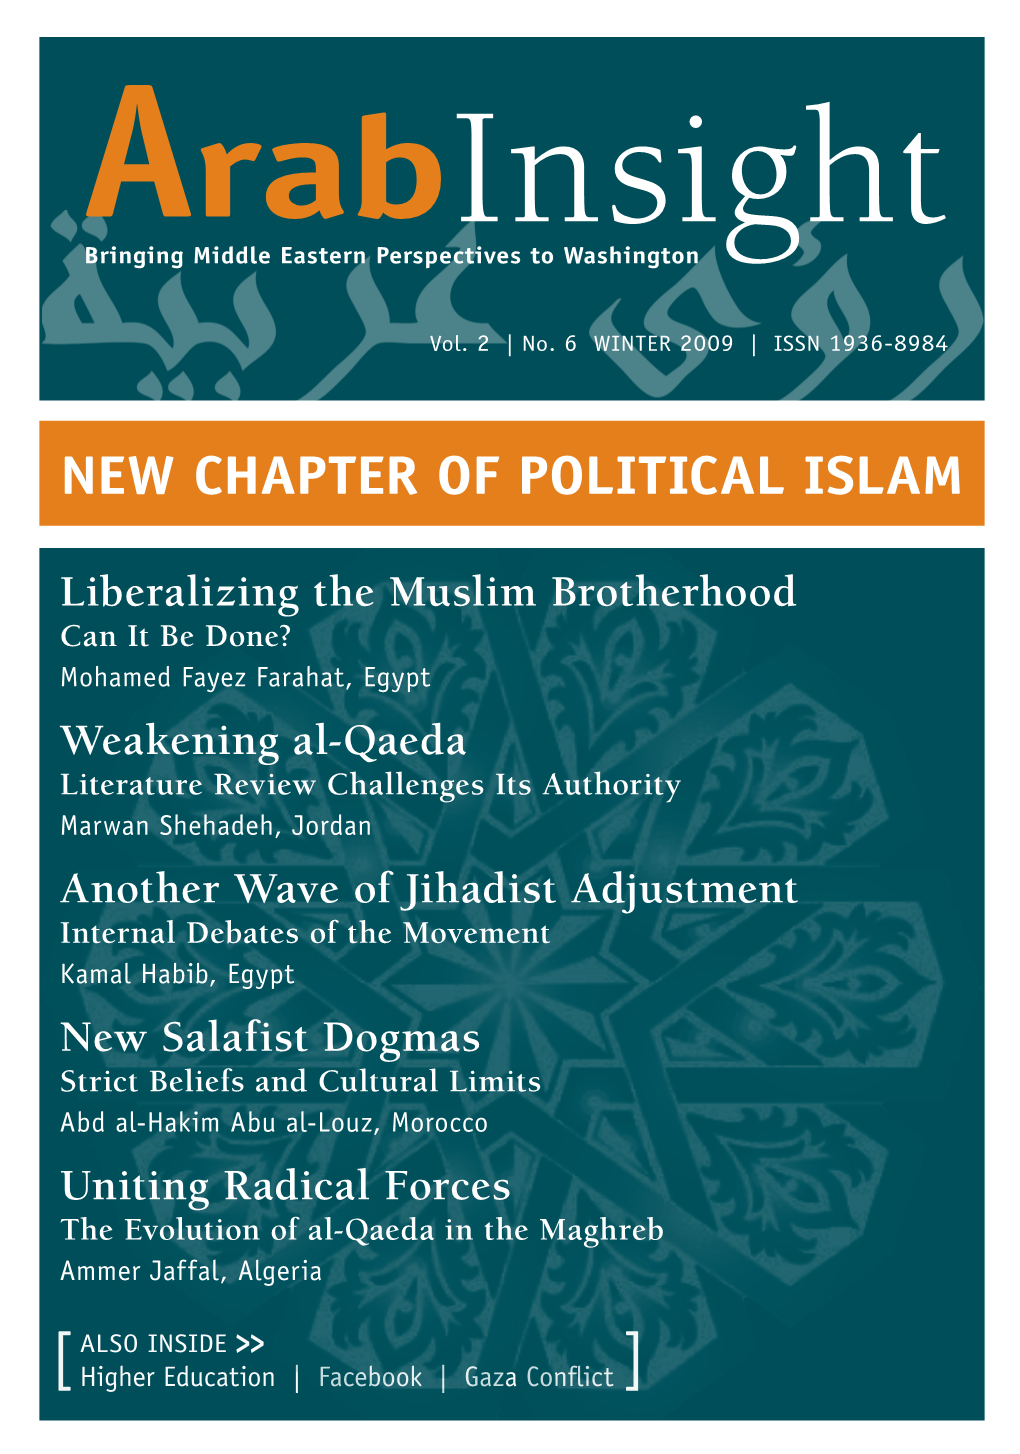 New Chapter of Political Islam